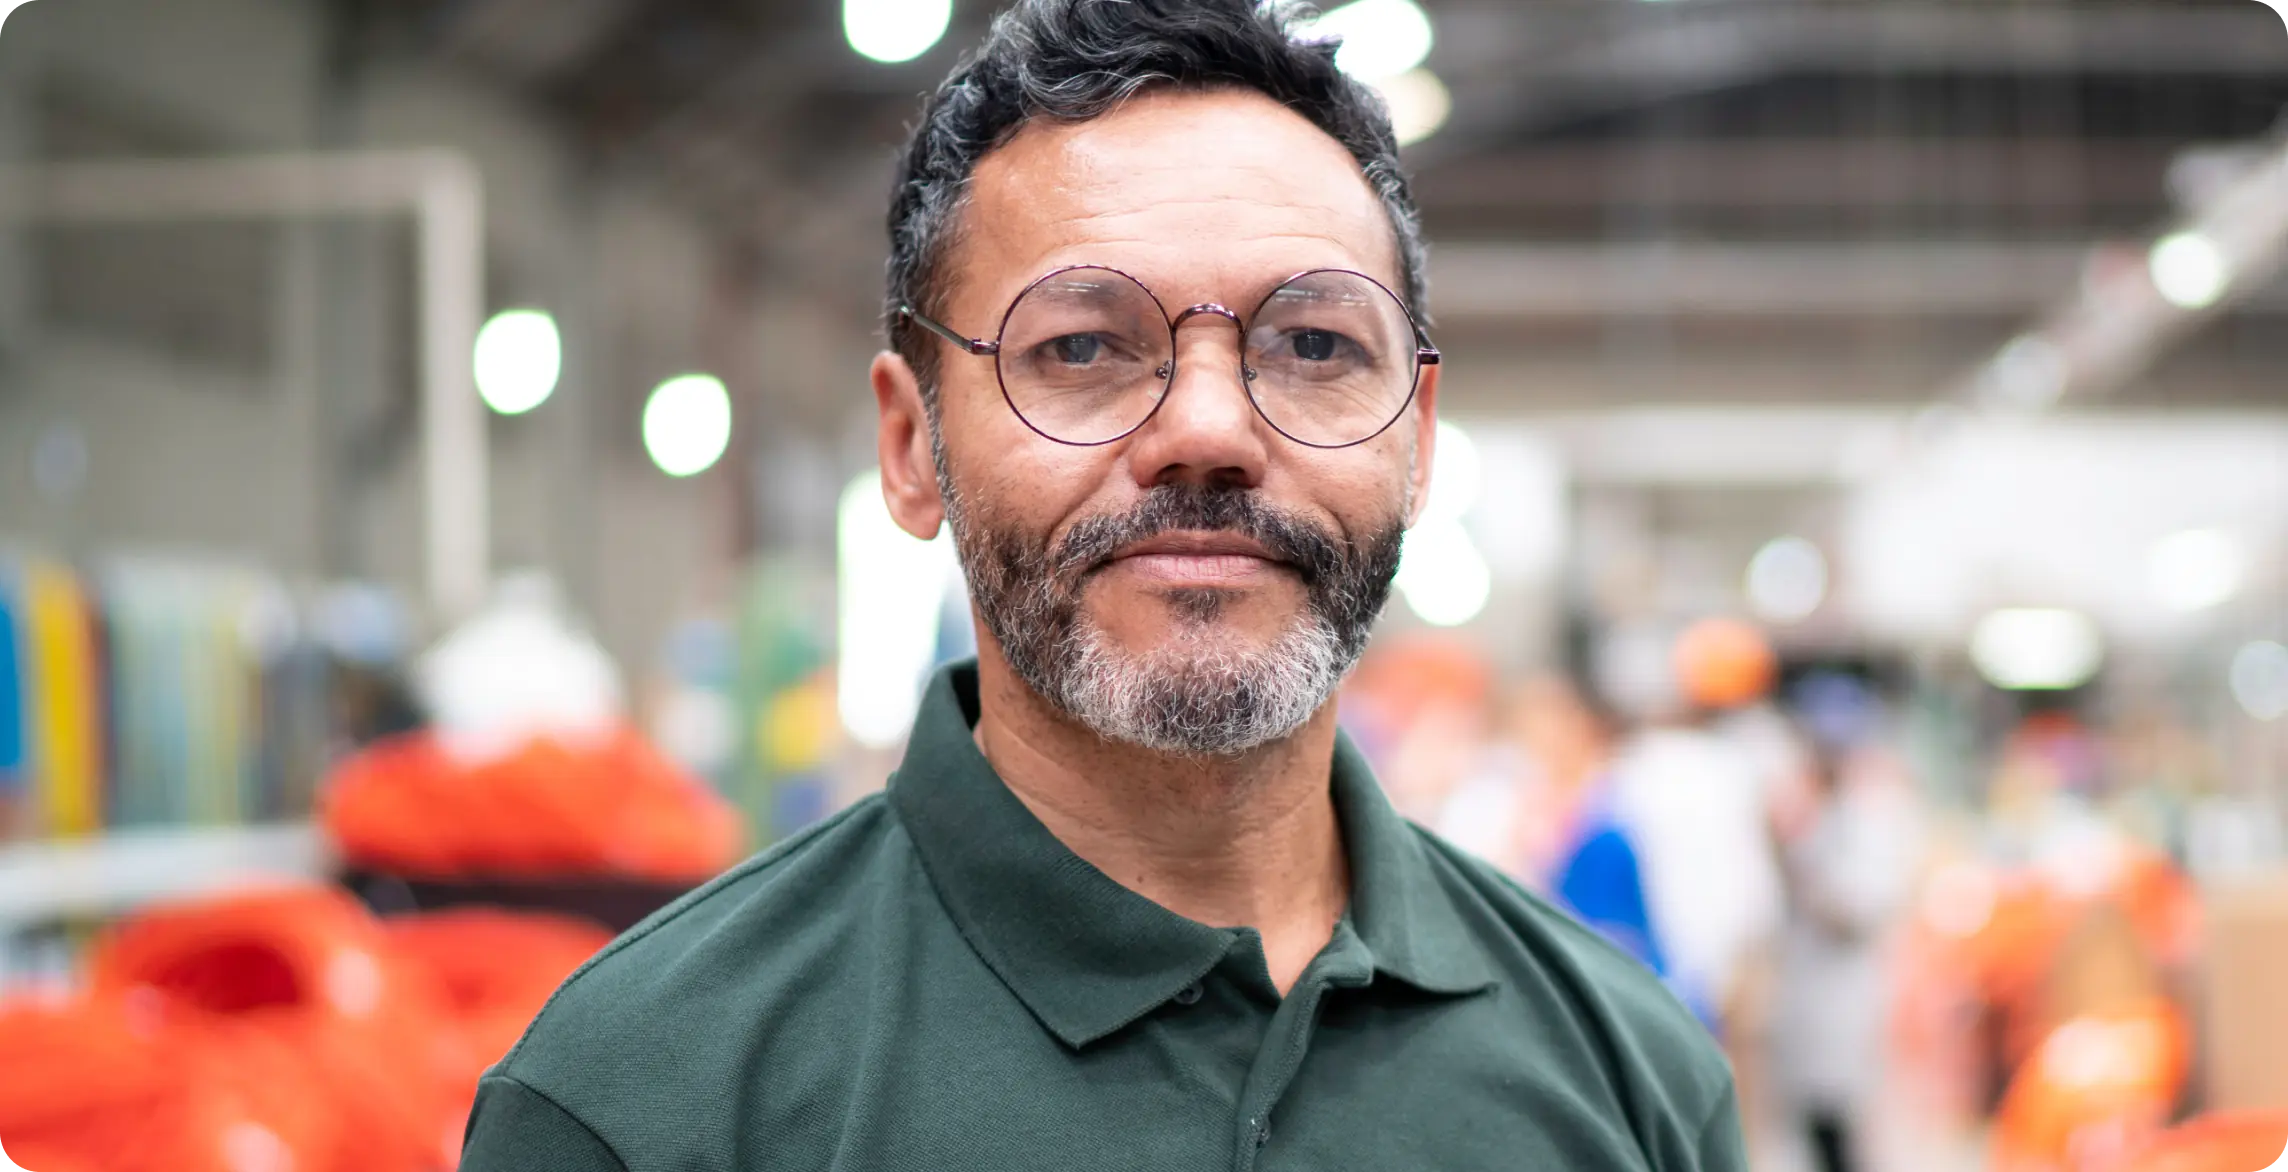 A man in a green polo shirt and glasses standing in a factory.